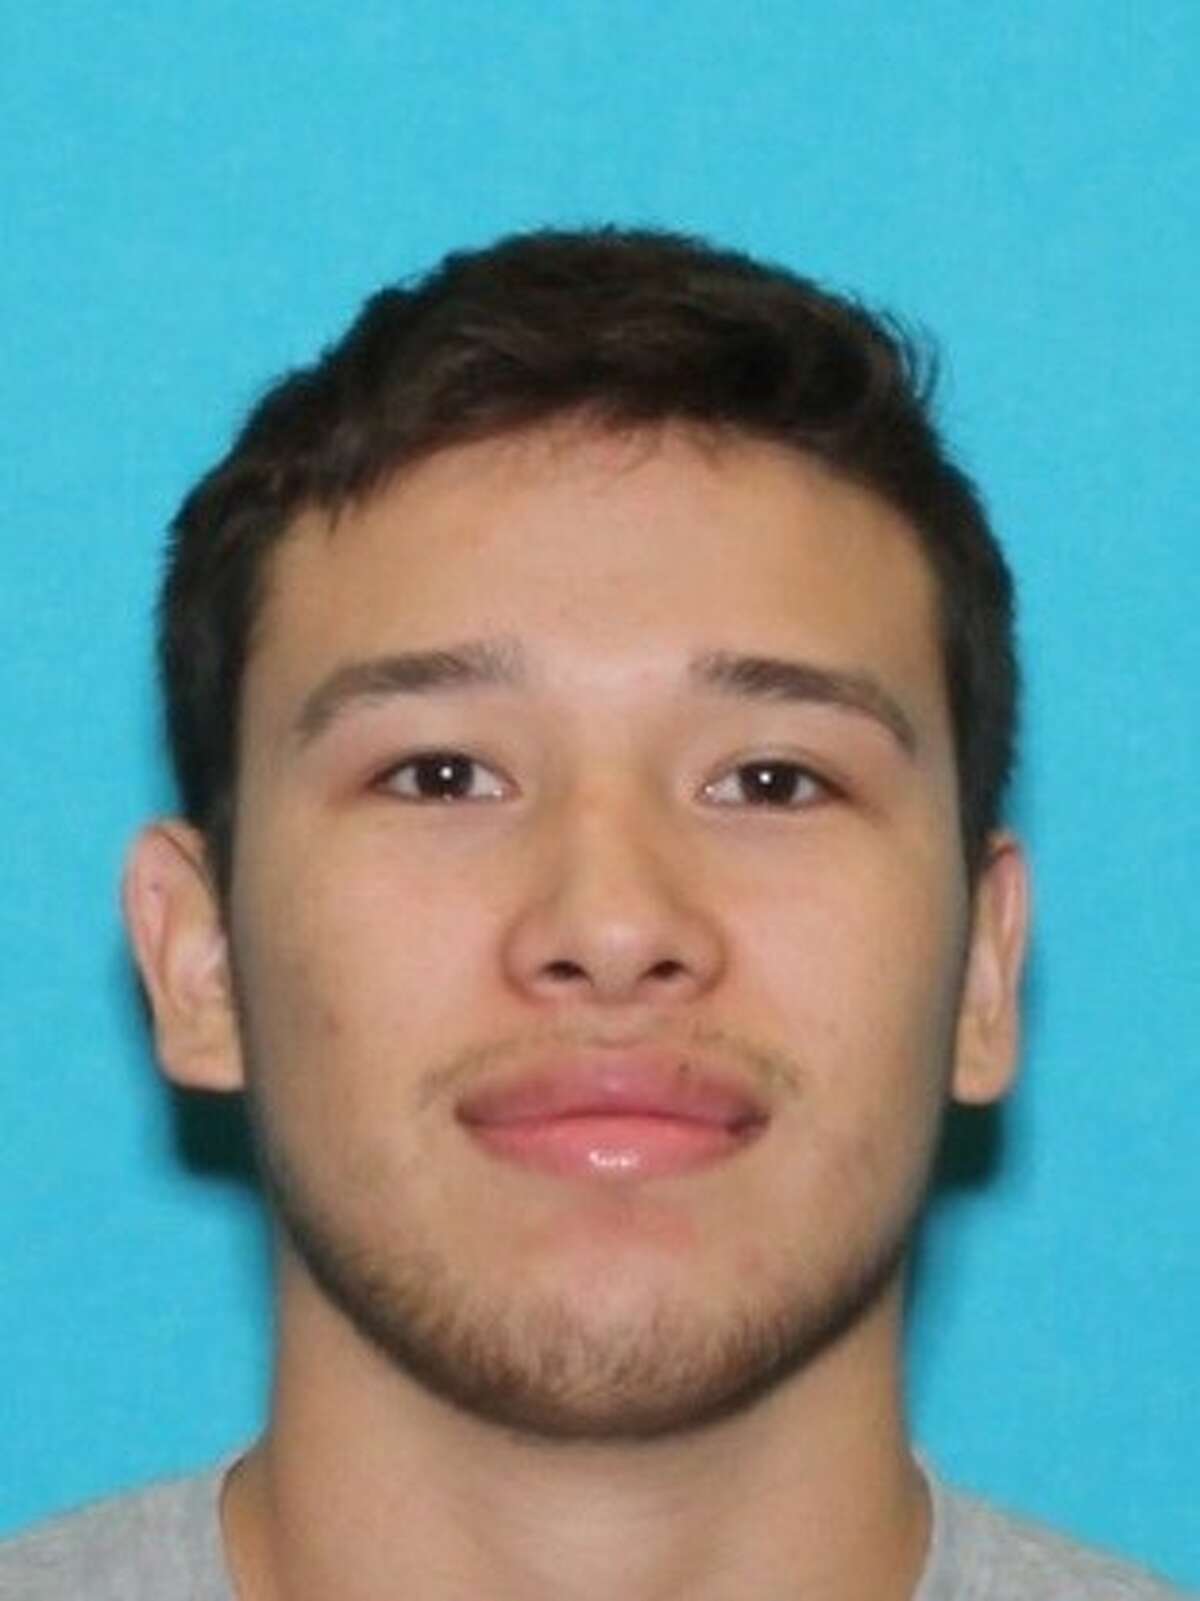 More than three years later, San Antonio police are still searching for the people responsible for a deadly prom night shooting that killed 20-year-old Joe Soto.